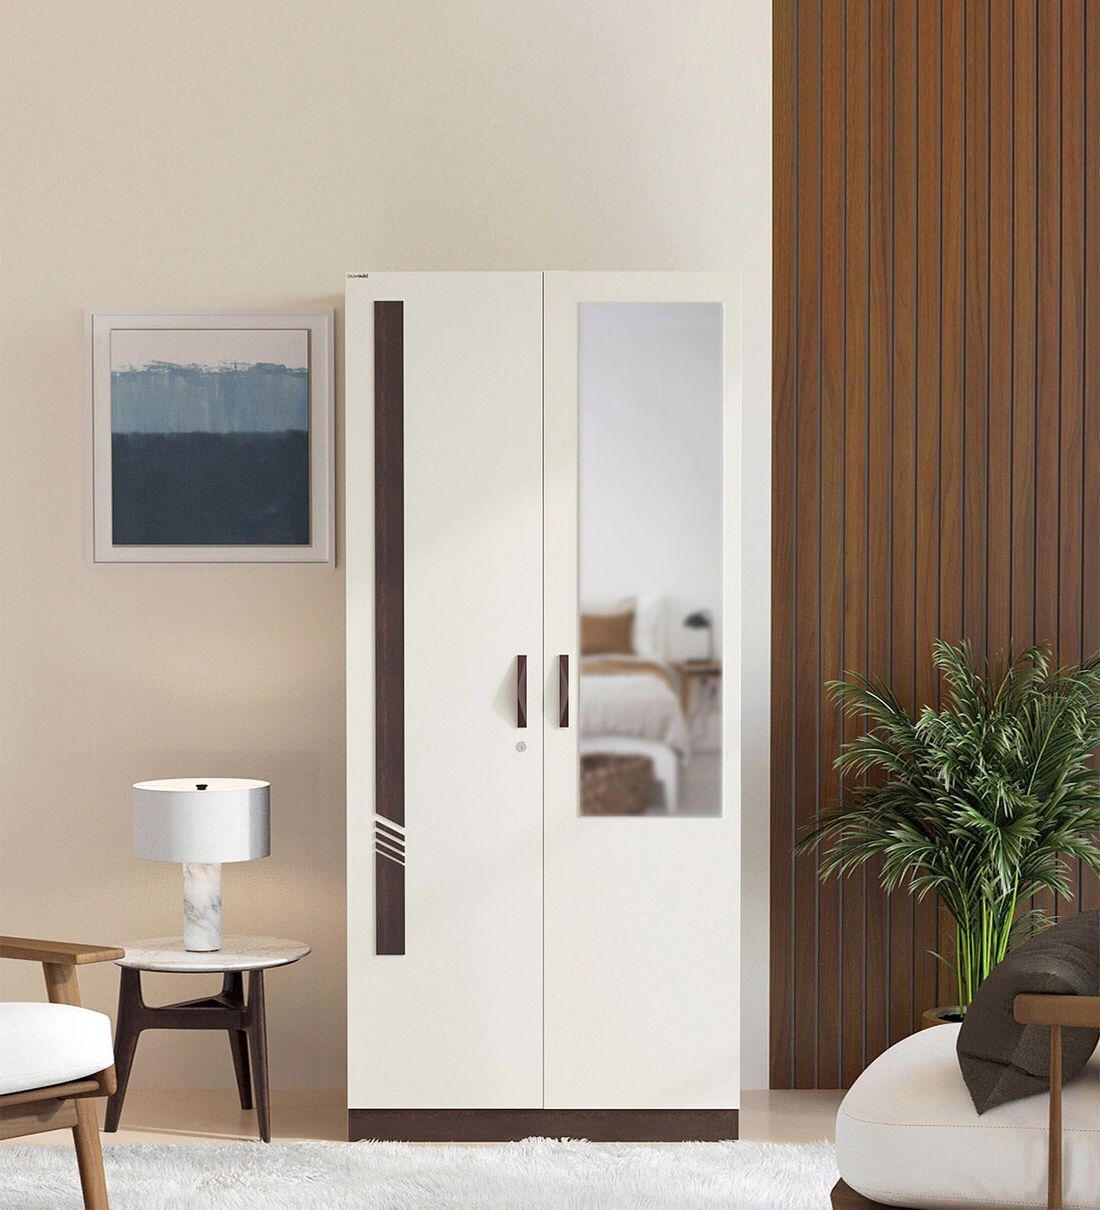 [%buy Andrie 2 Door Wardrobe In Wenge & White Finish With Mirror At 26% Off Bluewud | Pepperfry Throughout Preferred 2 Door Wardrobes|2 Door Wardrobes Pertaining To Preferred Buy Andrie 2 Door Wardrobe In Wenge & White Finish With Mirror At 26% Off Bluewud | Pepperfry|most Recent 2 Door Wardrobes With Regard To Buy Andrie 2 Door Wardrobe In Wenge & White Finish With Mirror At 26% Off Bluewud | Pepperfry|latest Buy Andrie 2 Door Wardrobe In Wenge & White Finish With Mirror At 26% Off Bluewud | Pepperfry Inside 2 Door Wardrobes%] (View 9 of 10)